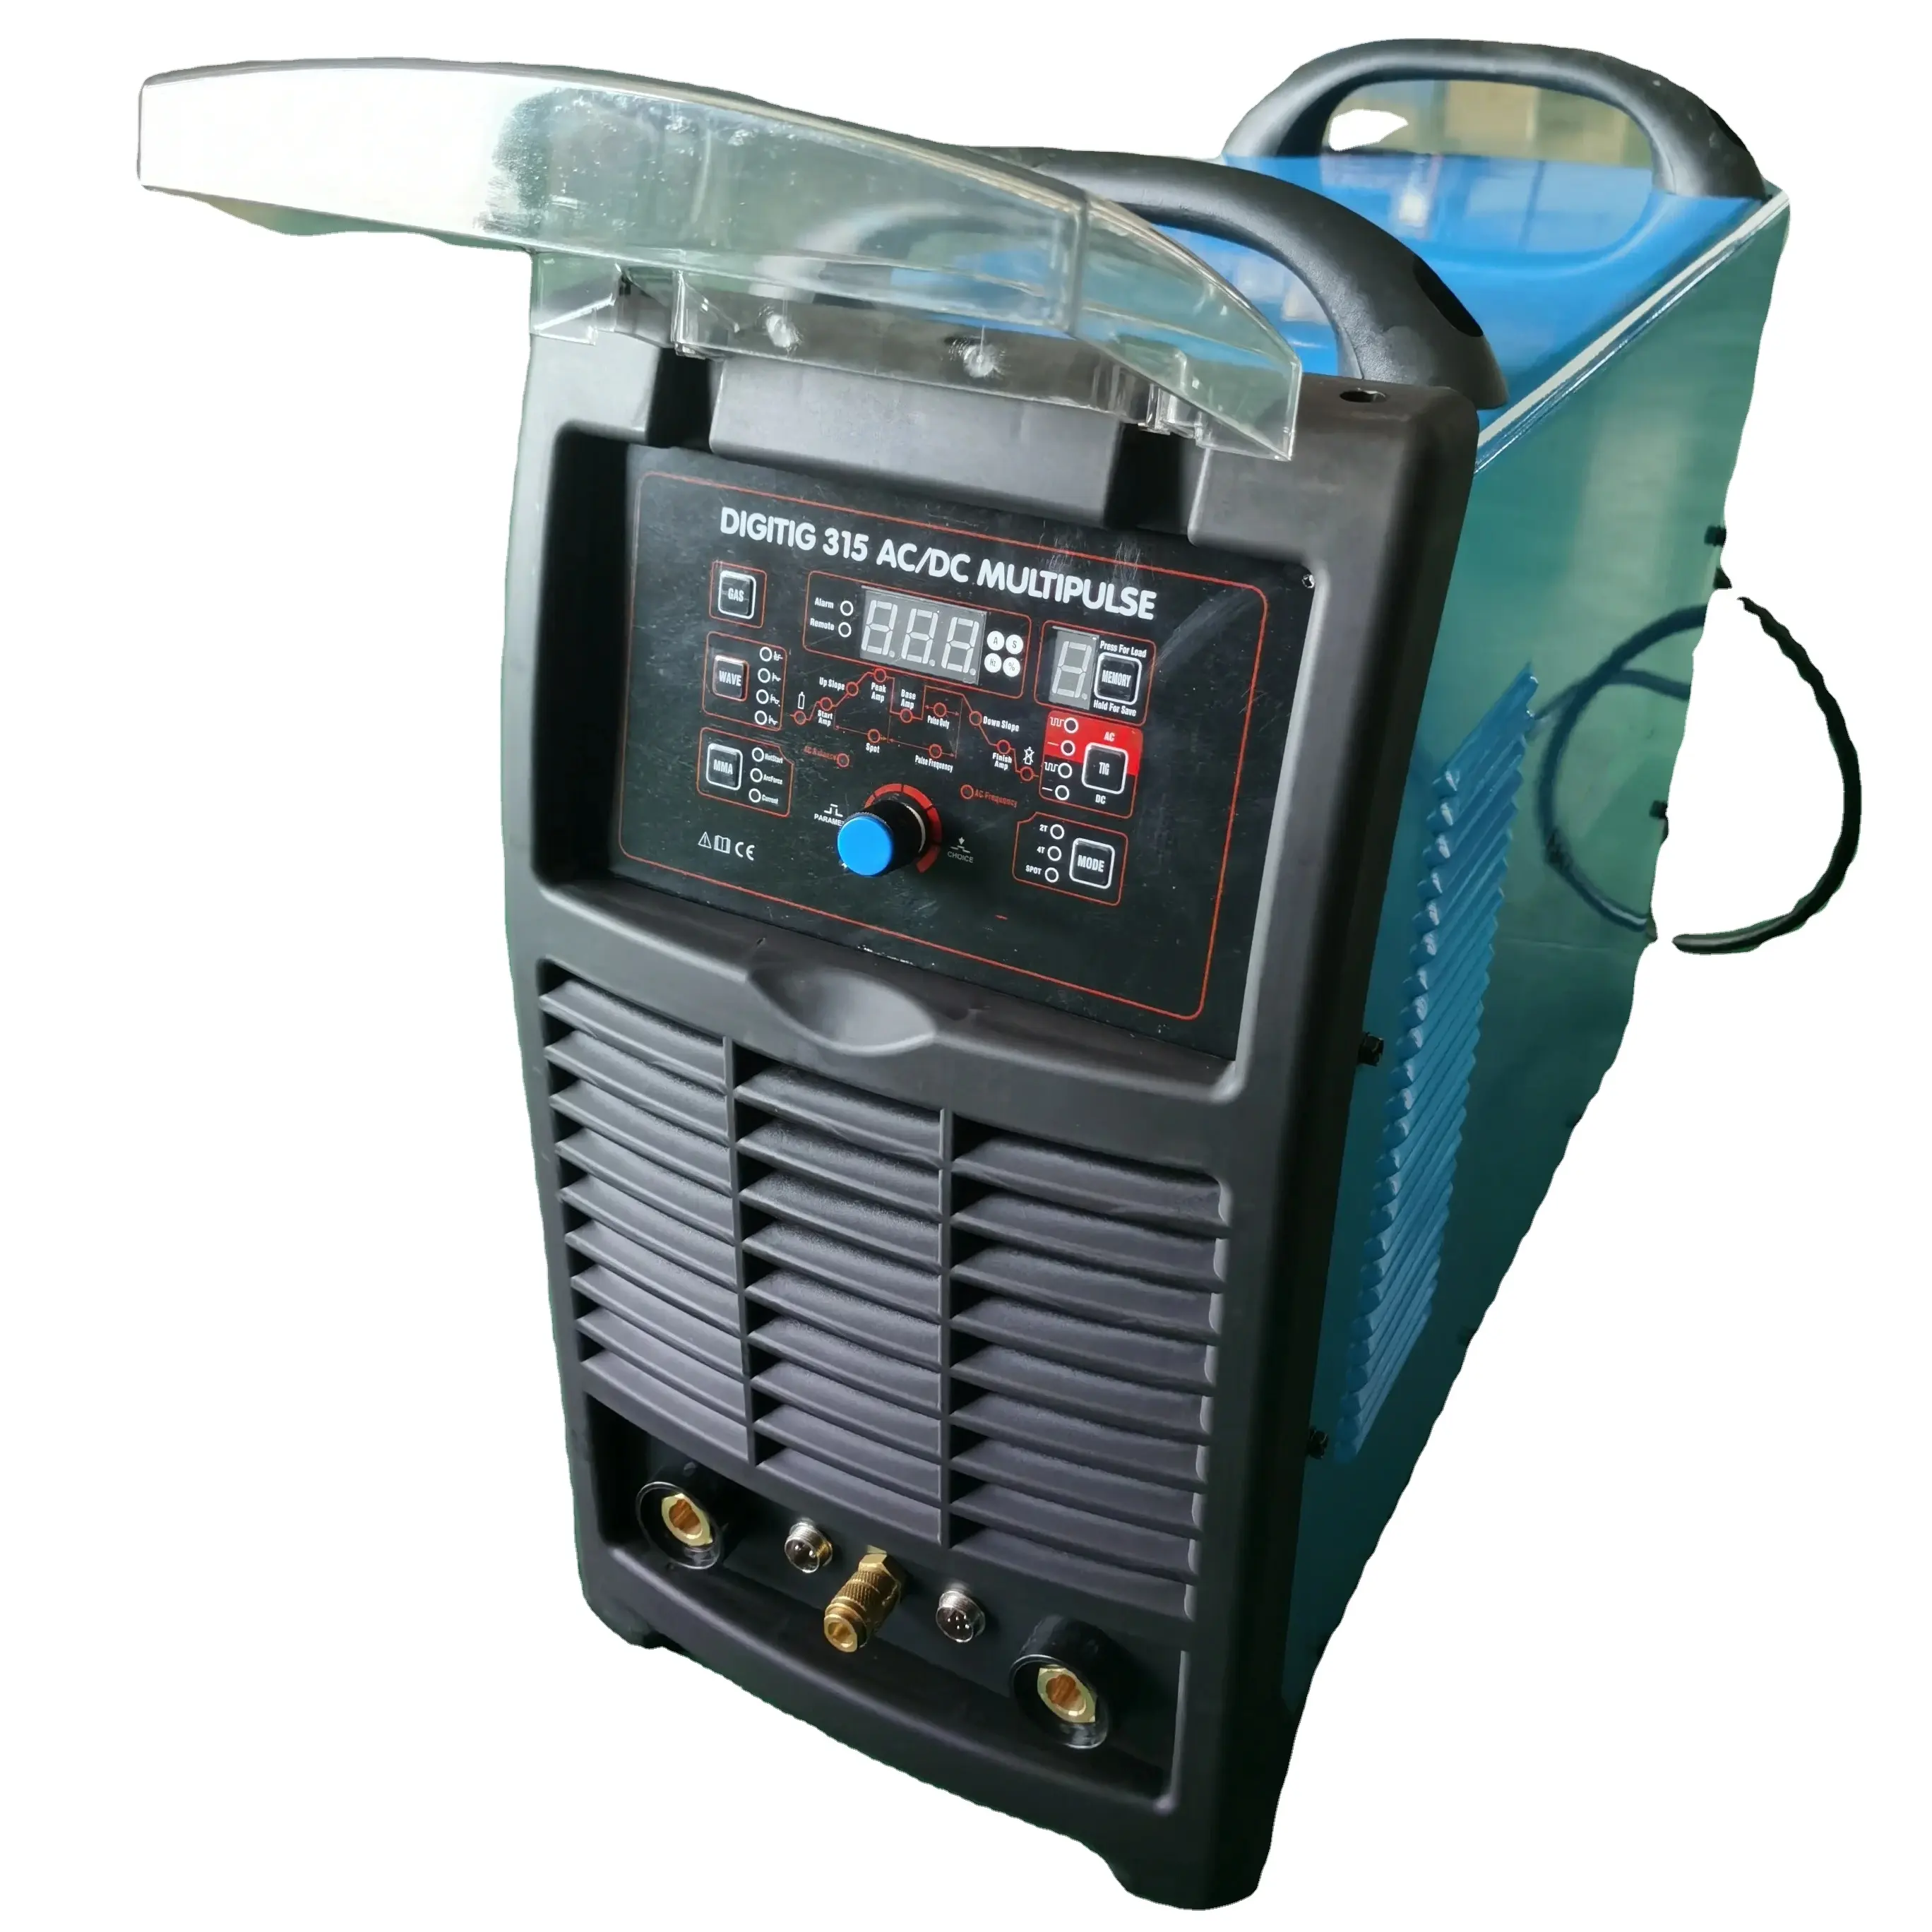 Anti Electromagnetic Interference Counter top Welding Mig TIG AC DC moddel 315 welding machine